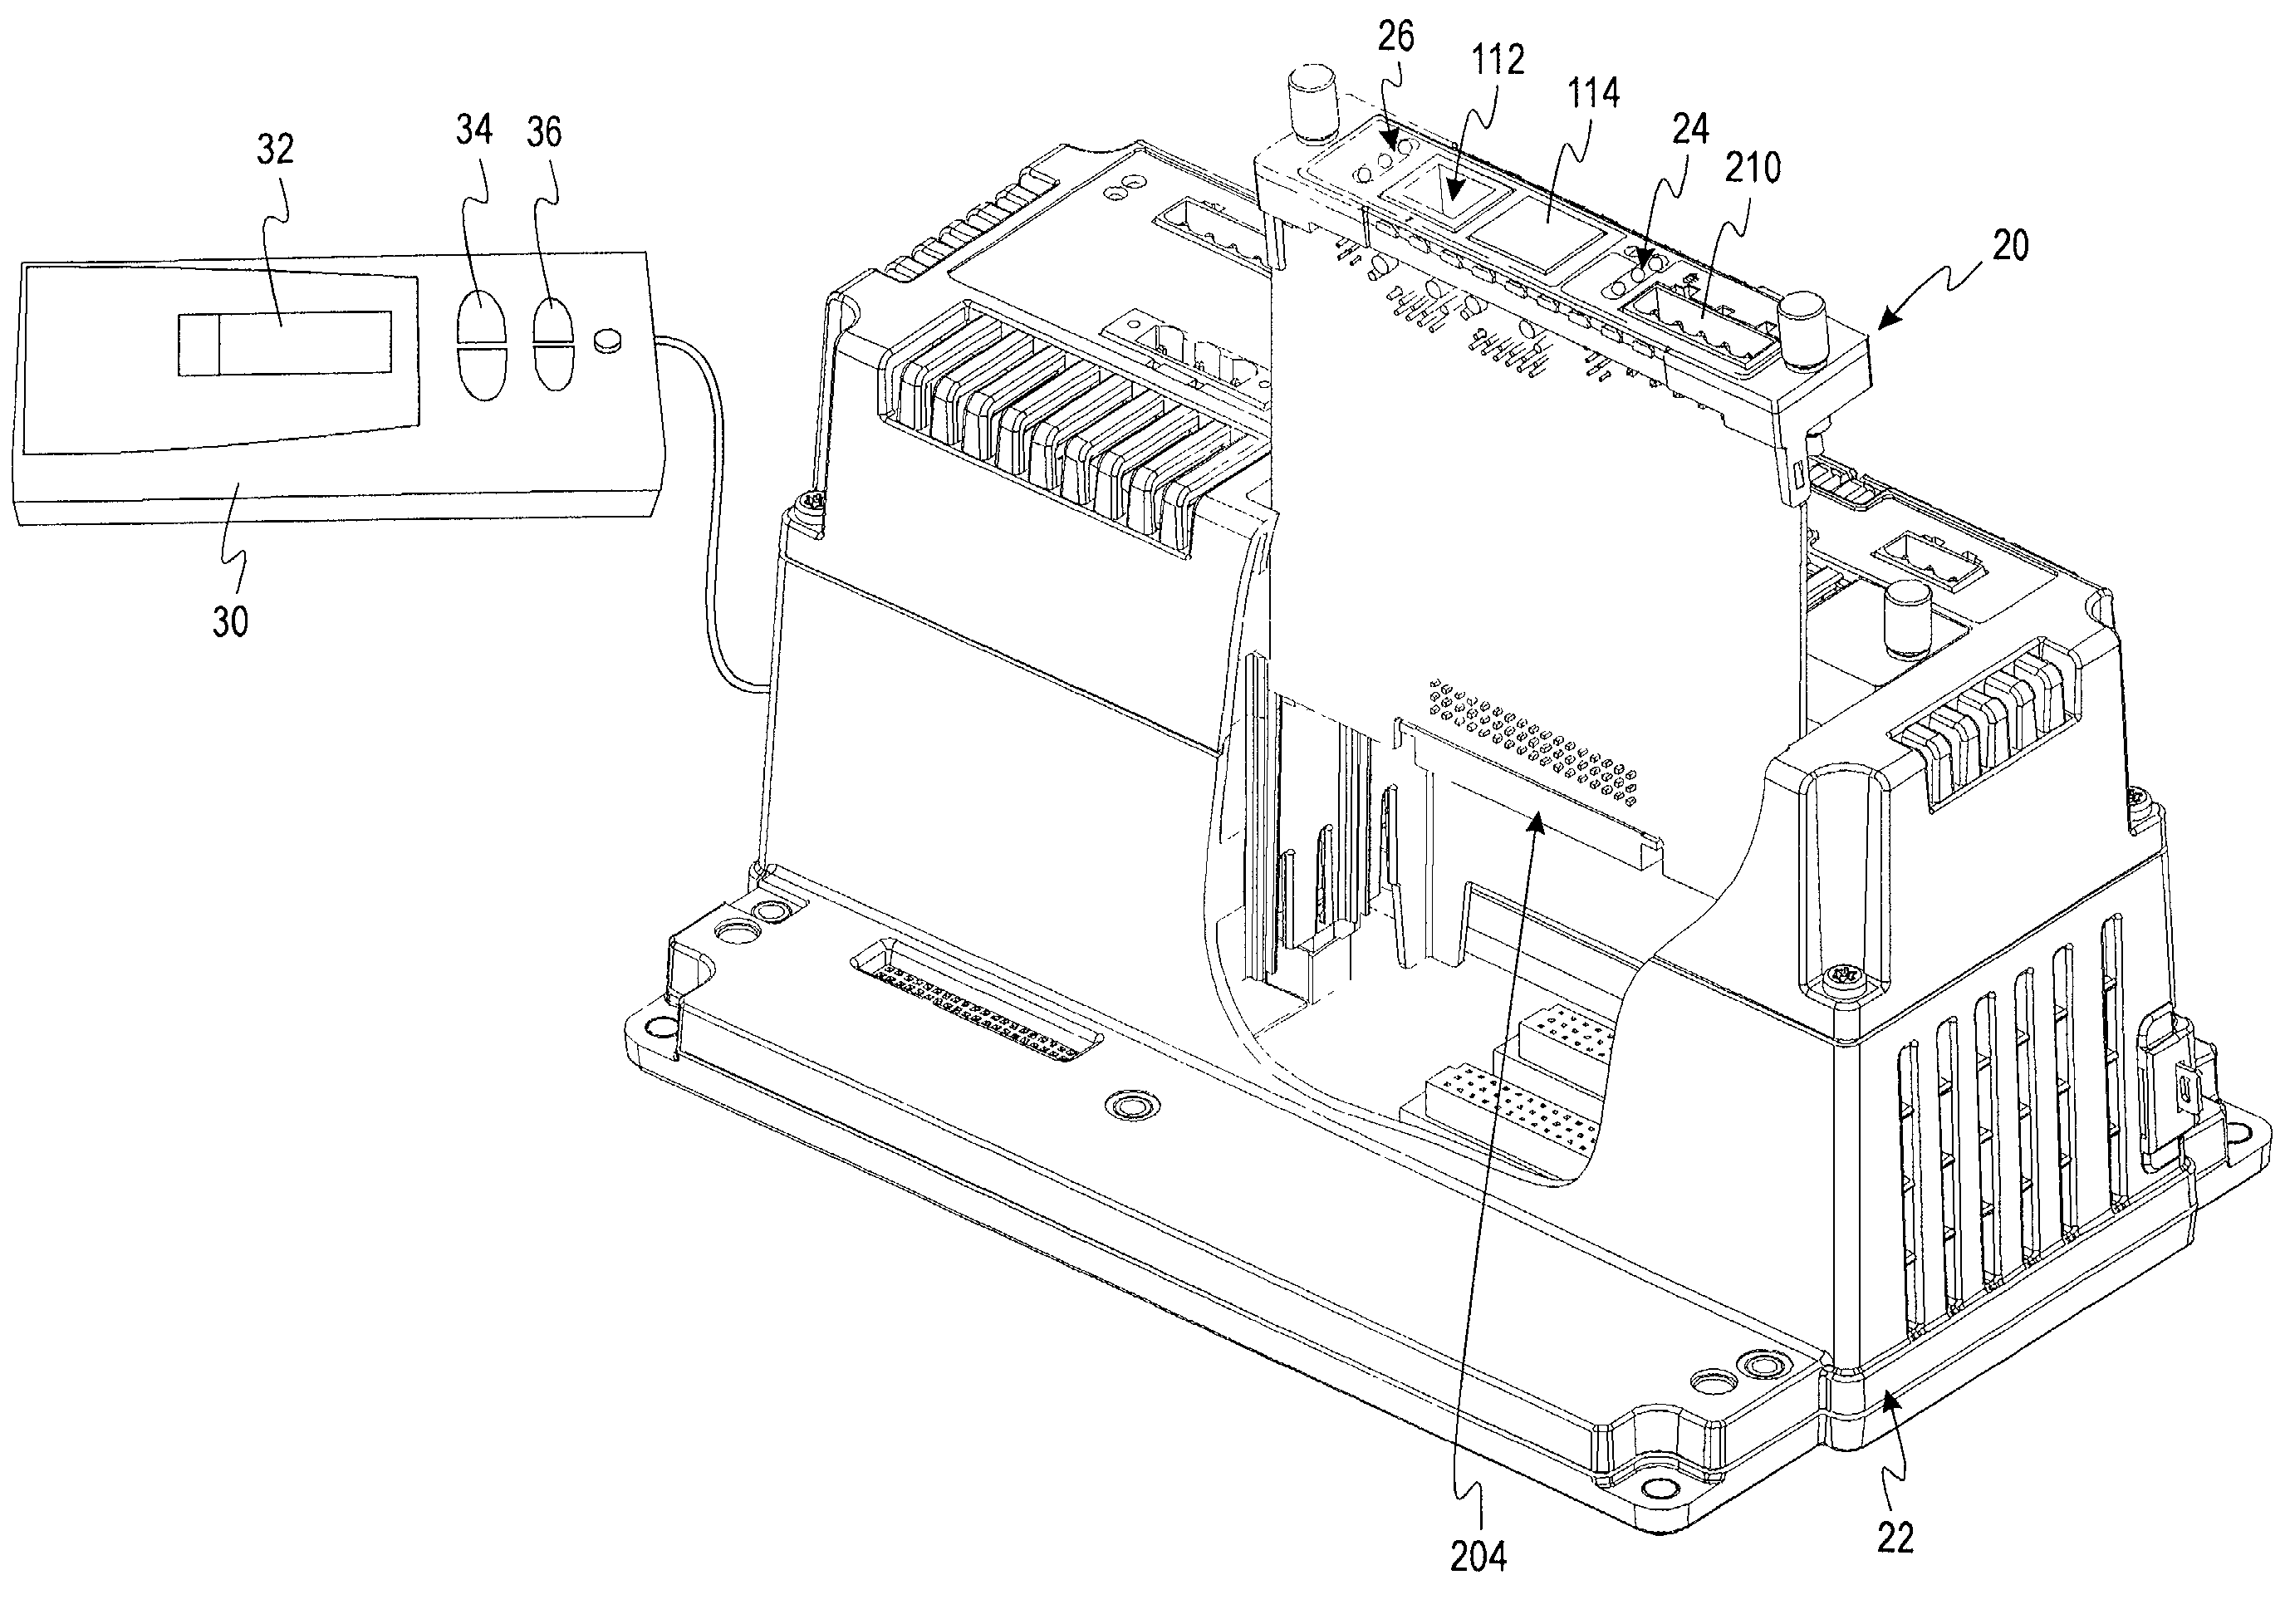 Ethernet communications for power monitoring system